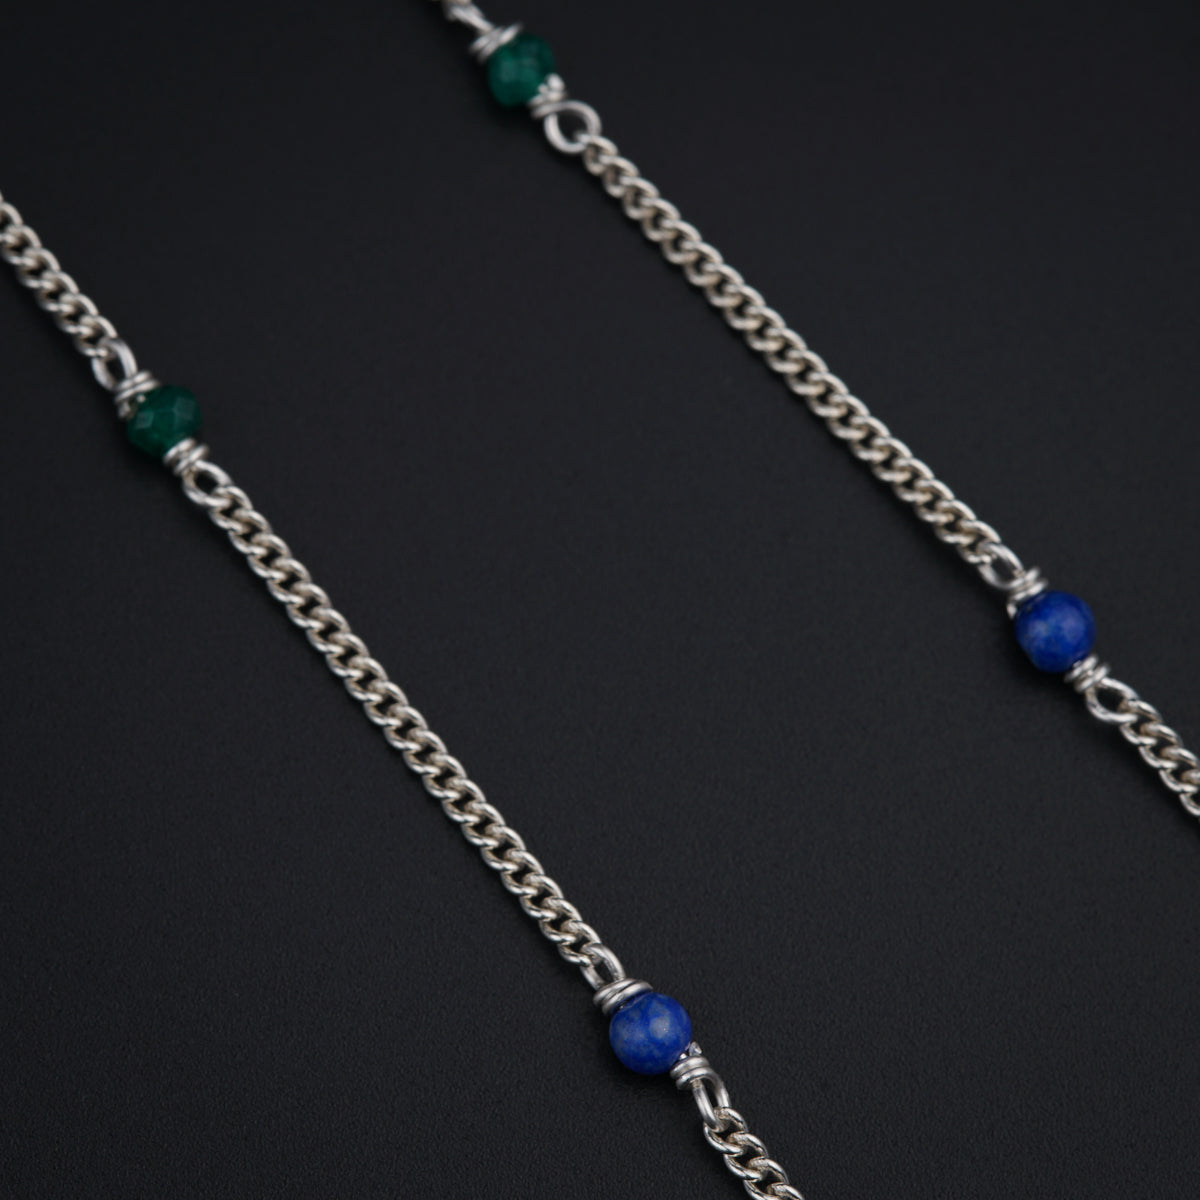 a close up of a chain with a blue bead on it